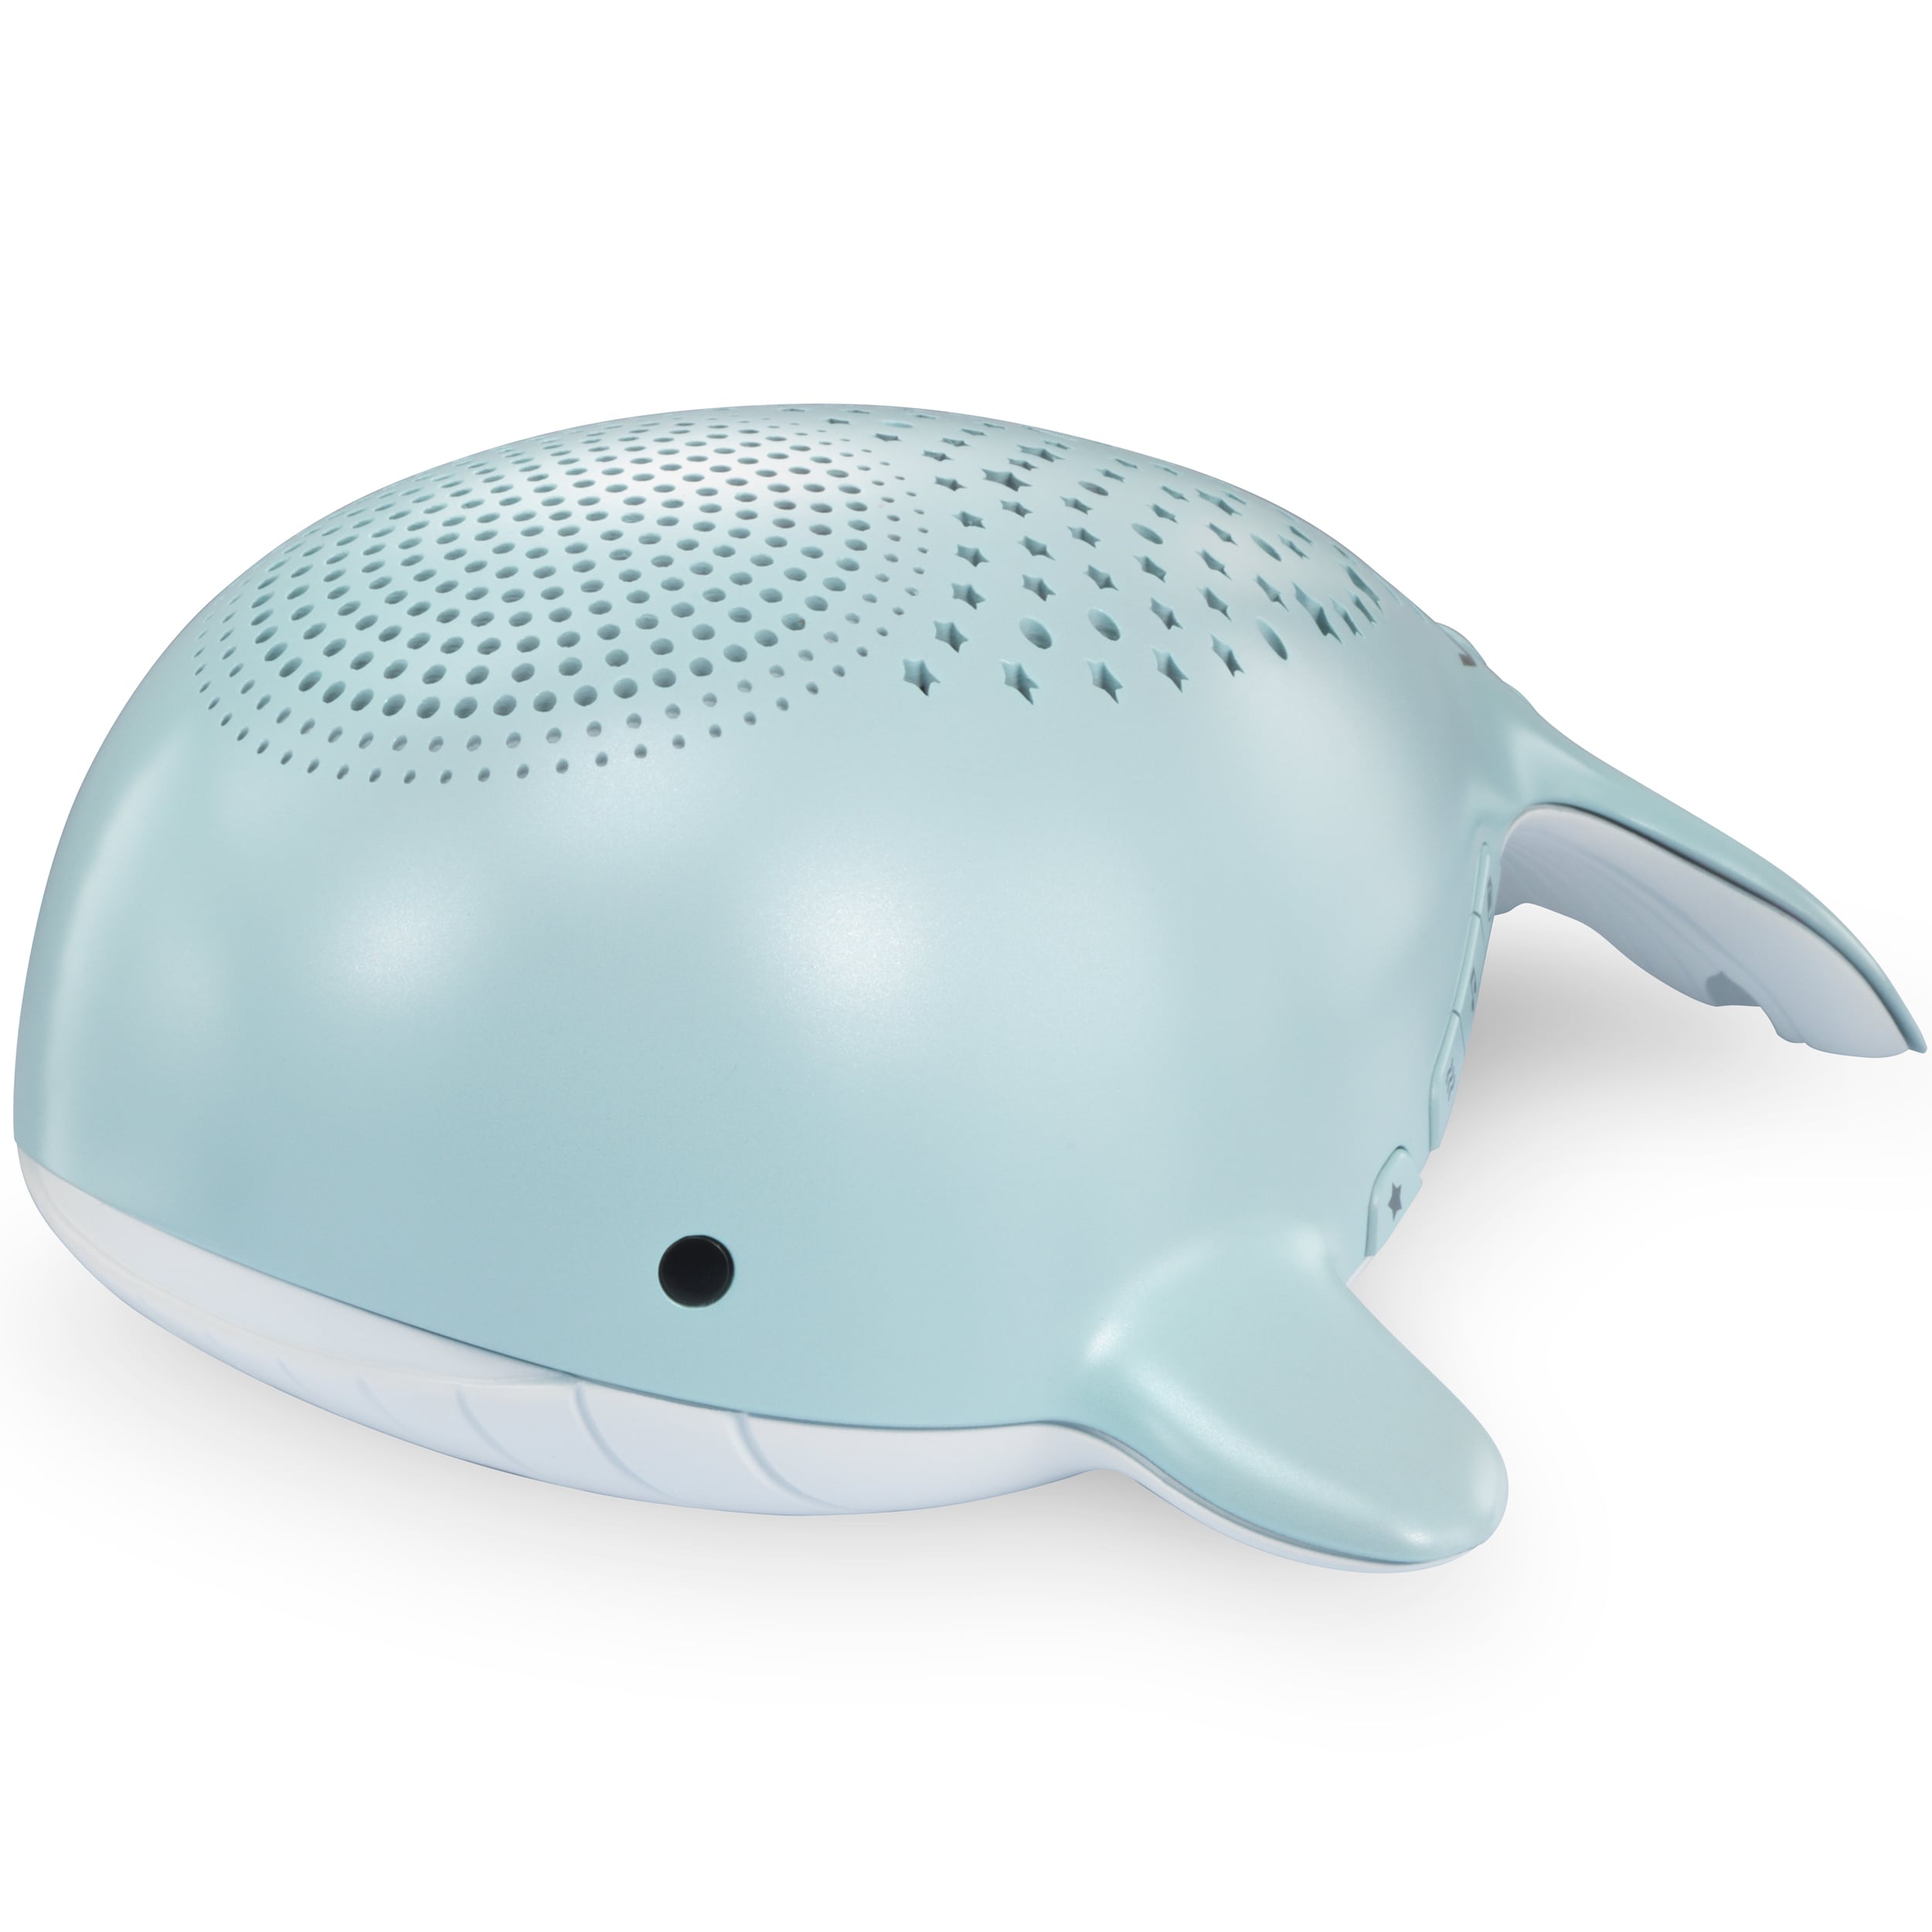 Wyatt the Whale® Storytelling Soother - view 4